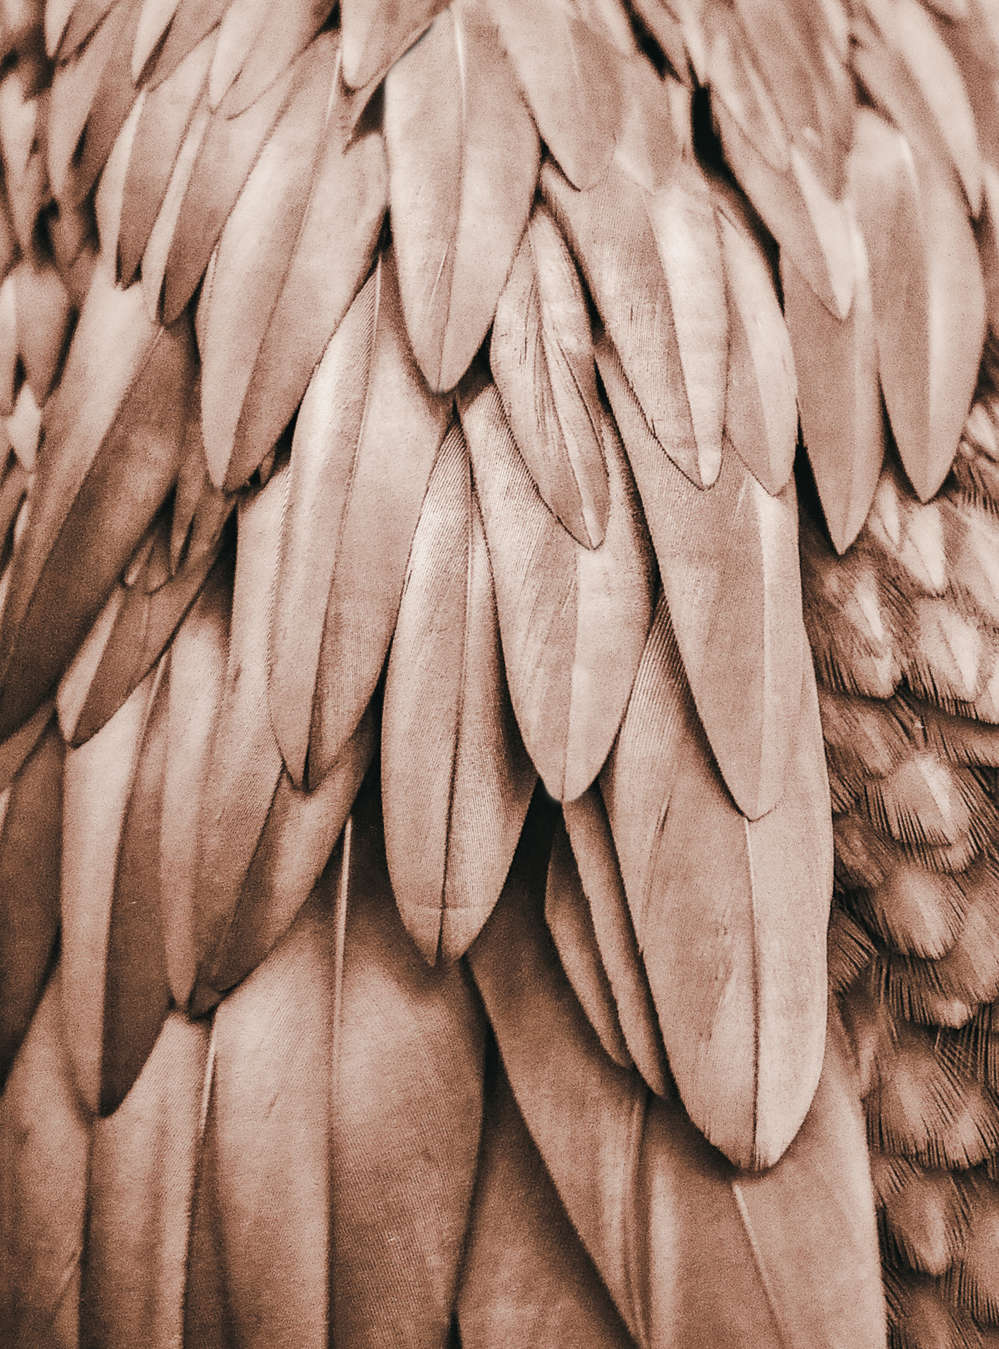             Photo wallpaper feather wings in sepia brown
        